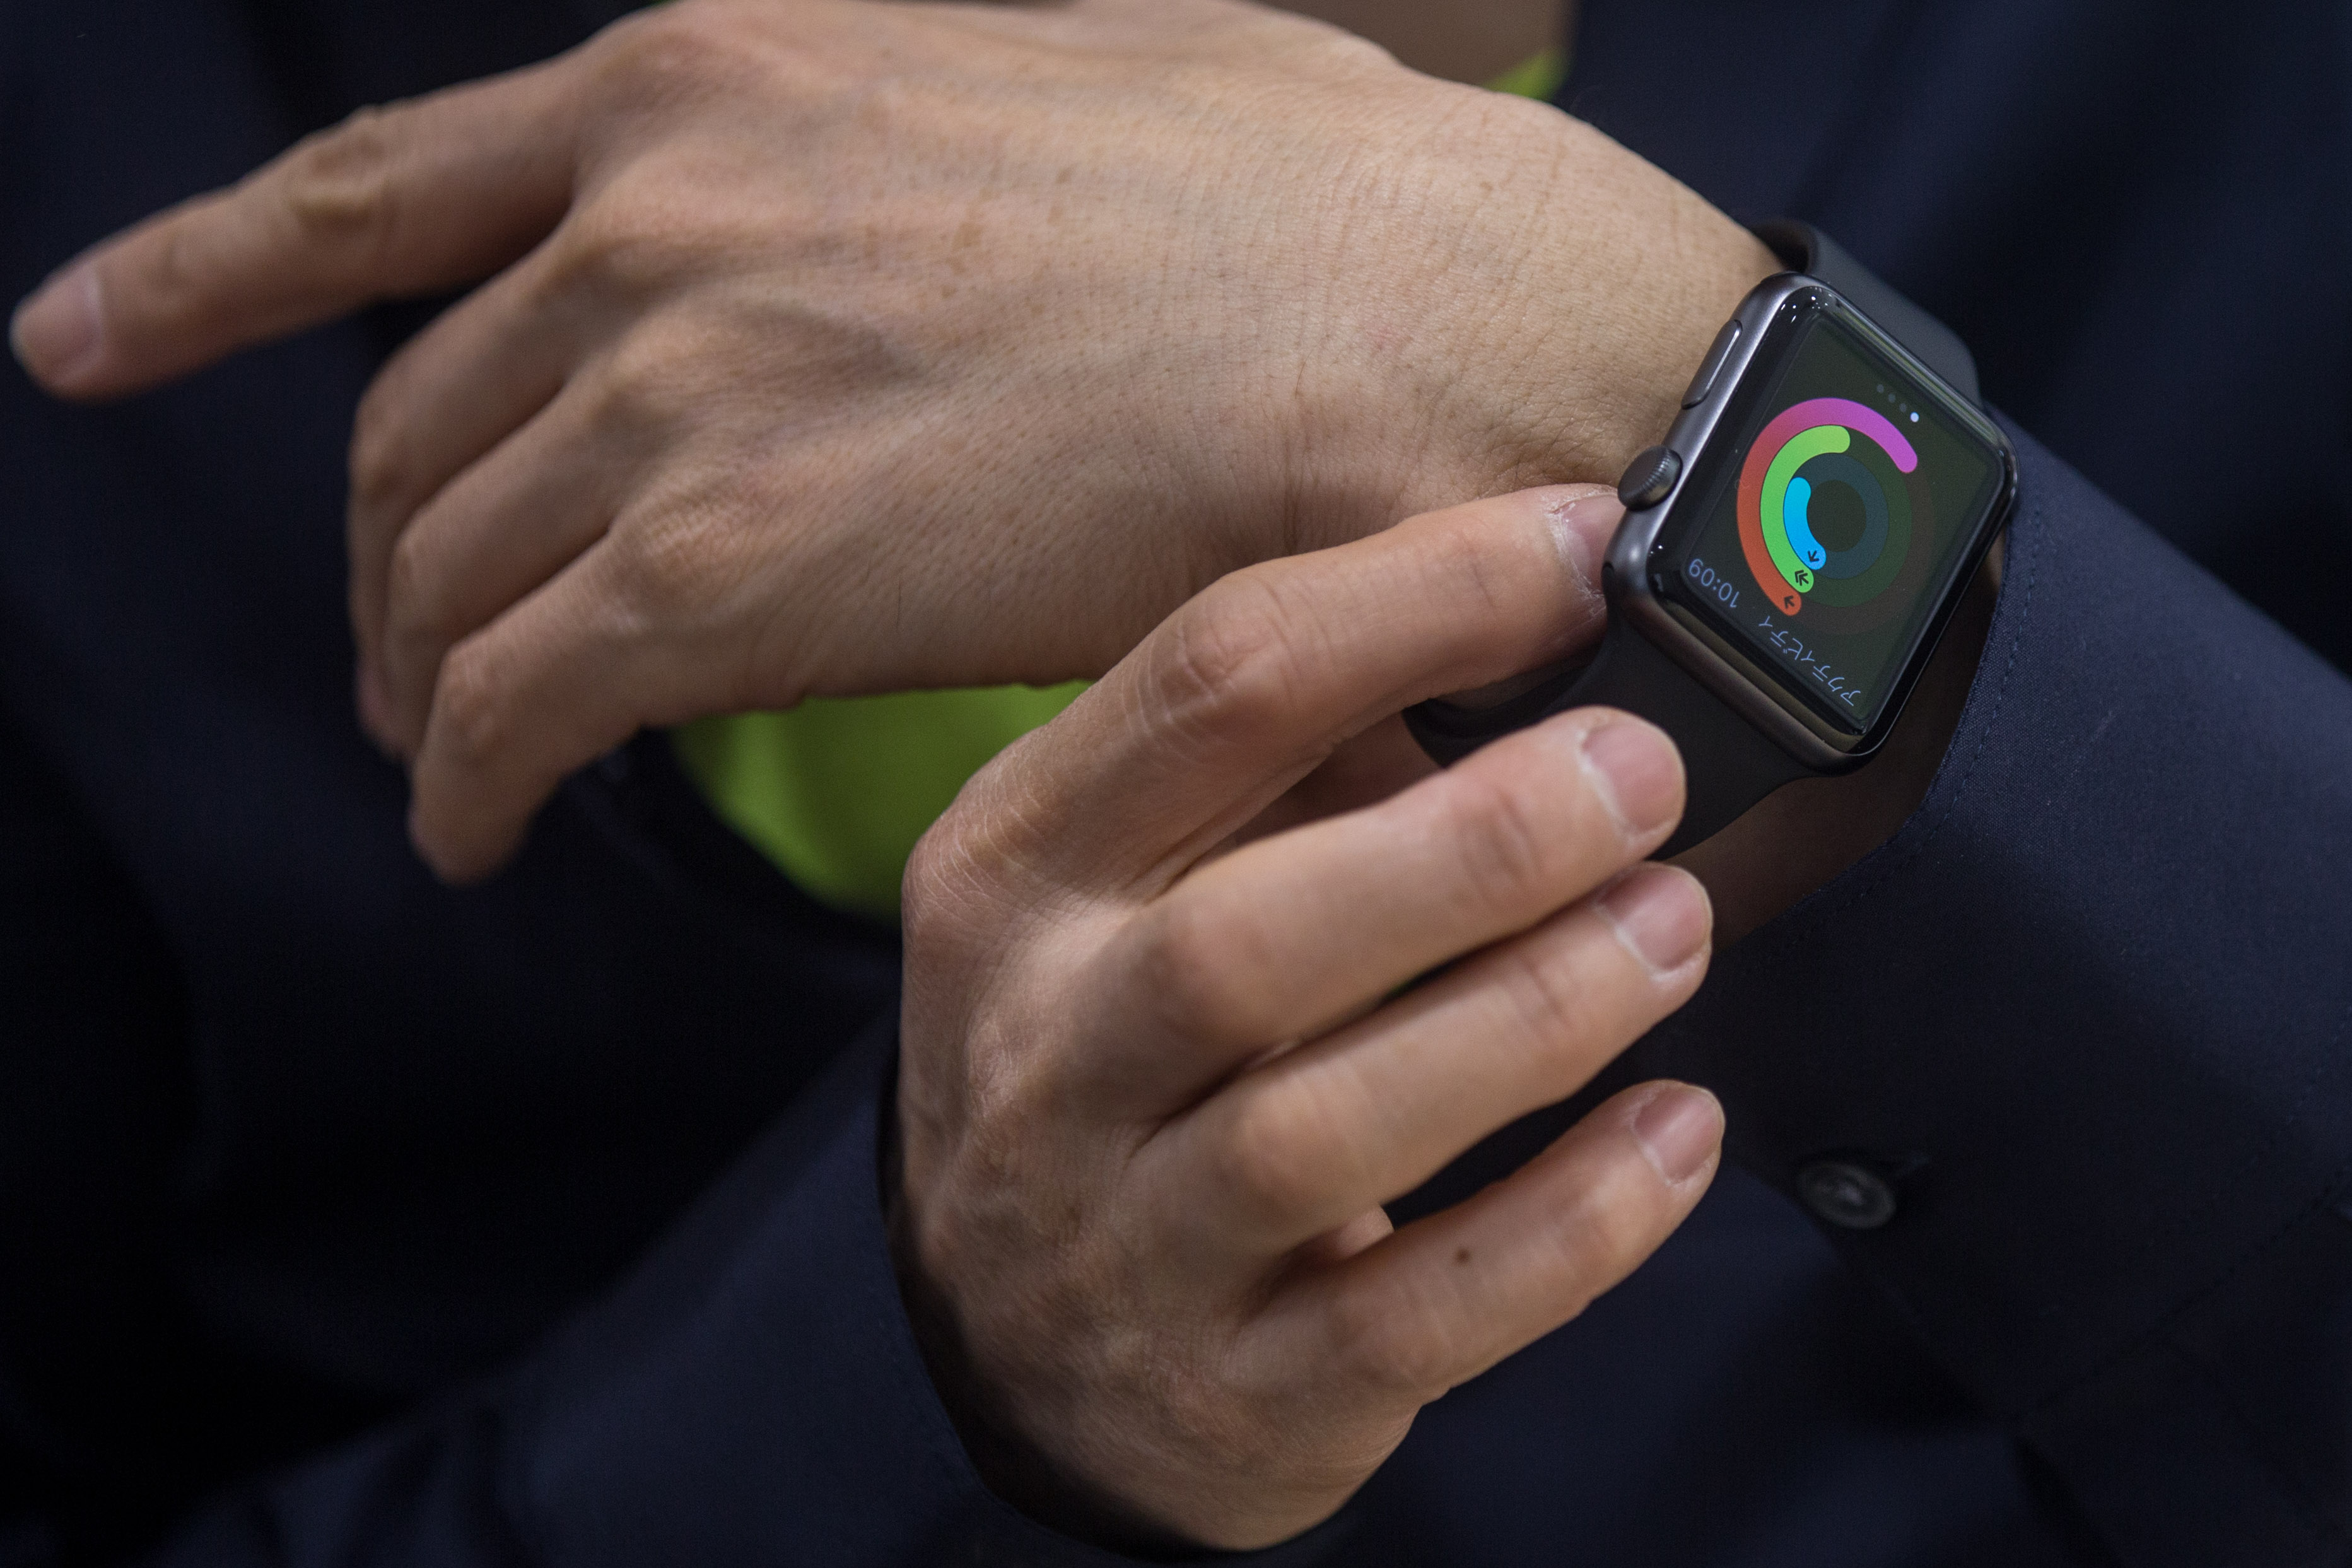 A customer tries on an Apple Watch at a store on April 24, 2015 in Tokyo, Japan. (Chris McGrath)